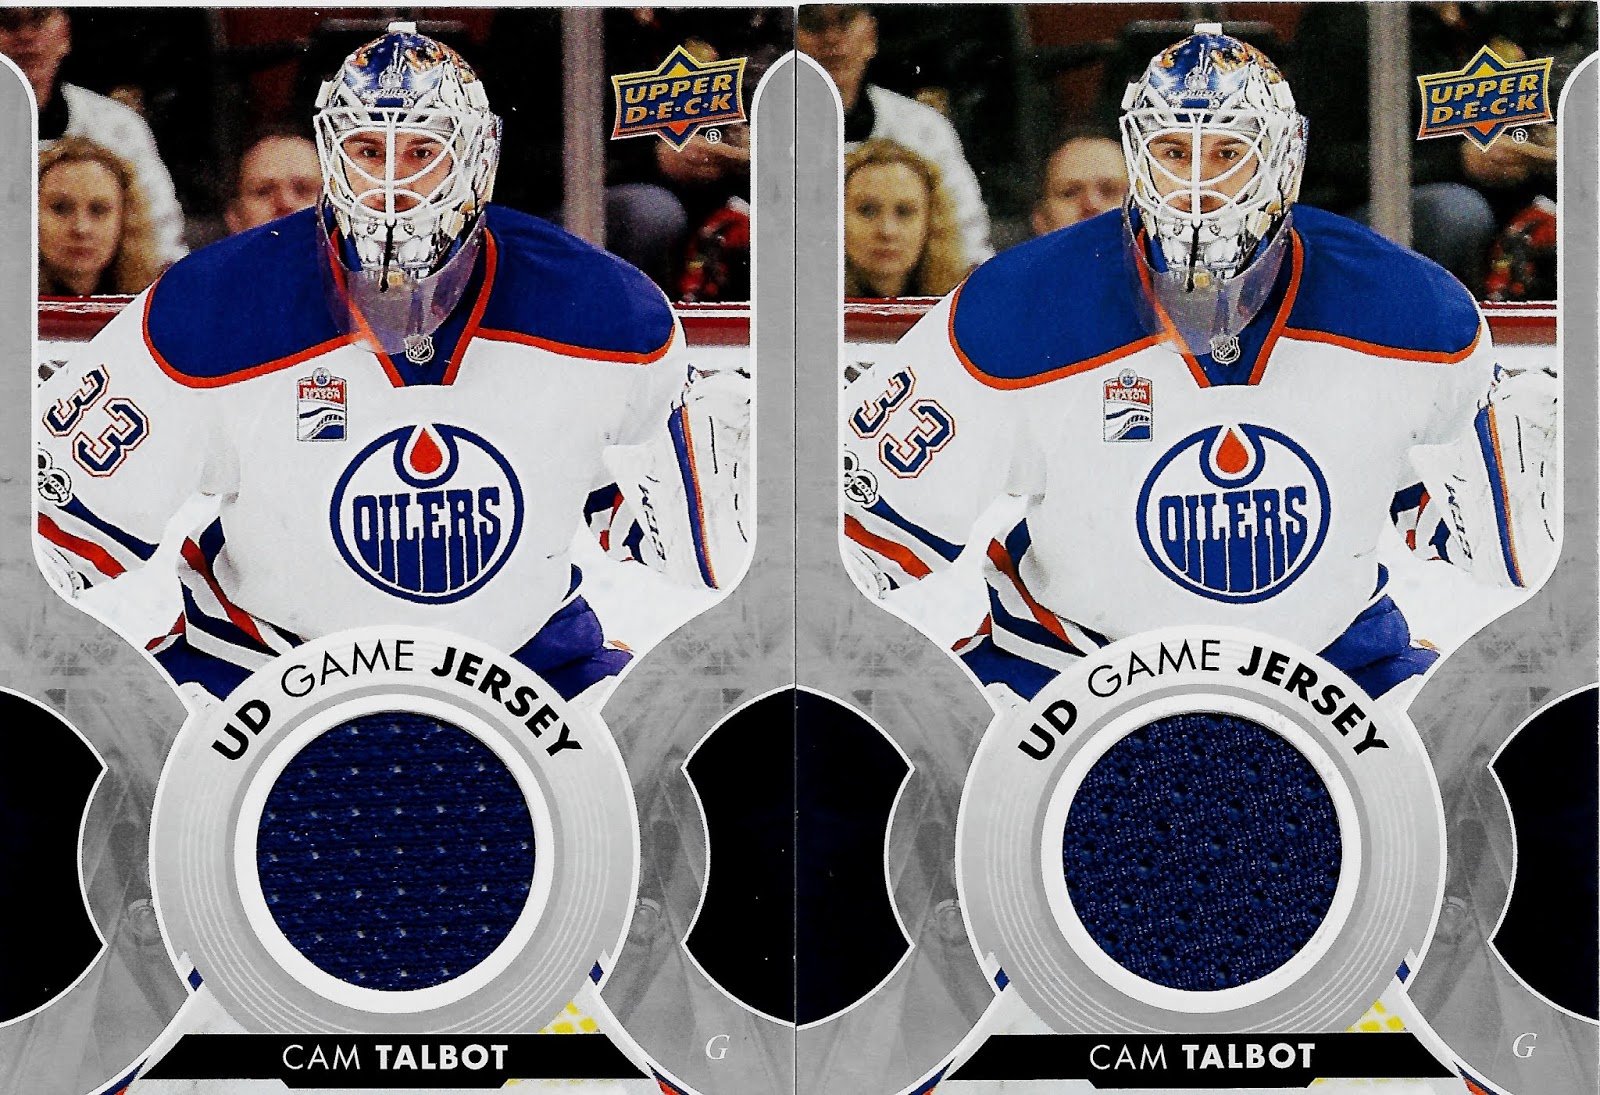  2018-19 SP Authentic Hockey #93 Cam Talbot Edmonton Oilers  Official NHL Trading Card From Upper Deck (UD) : Collectibles & Fine Art